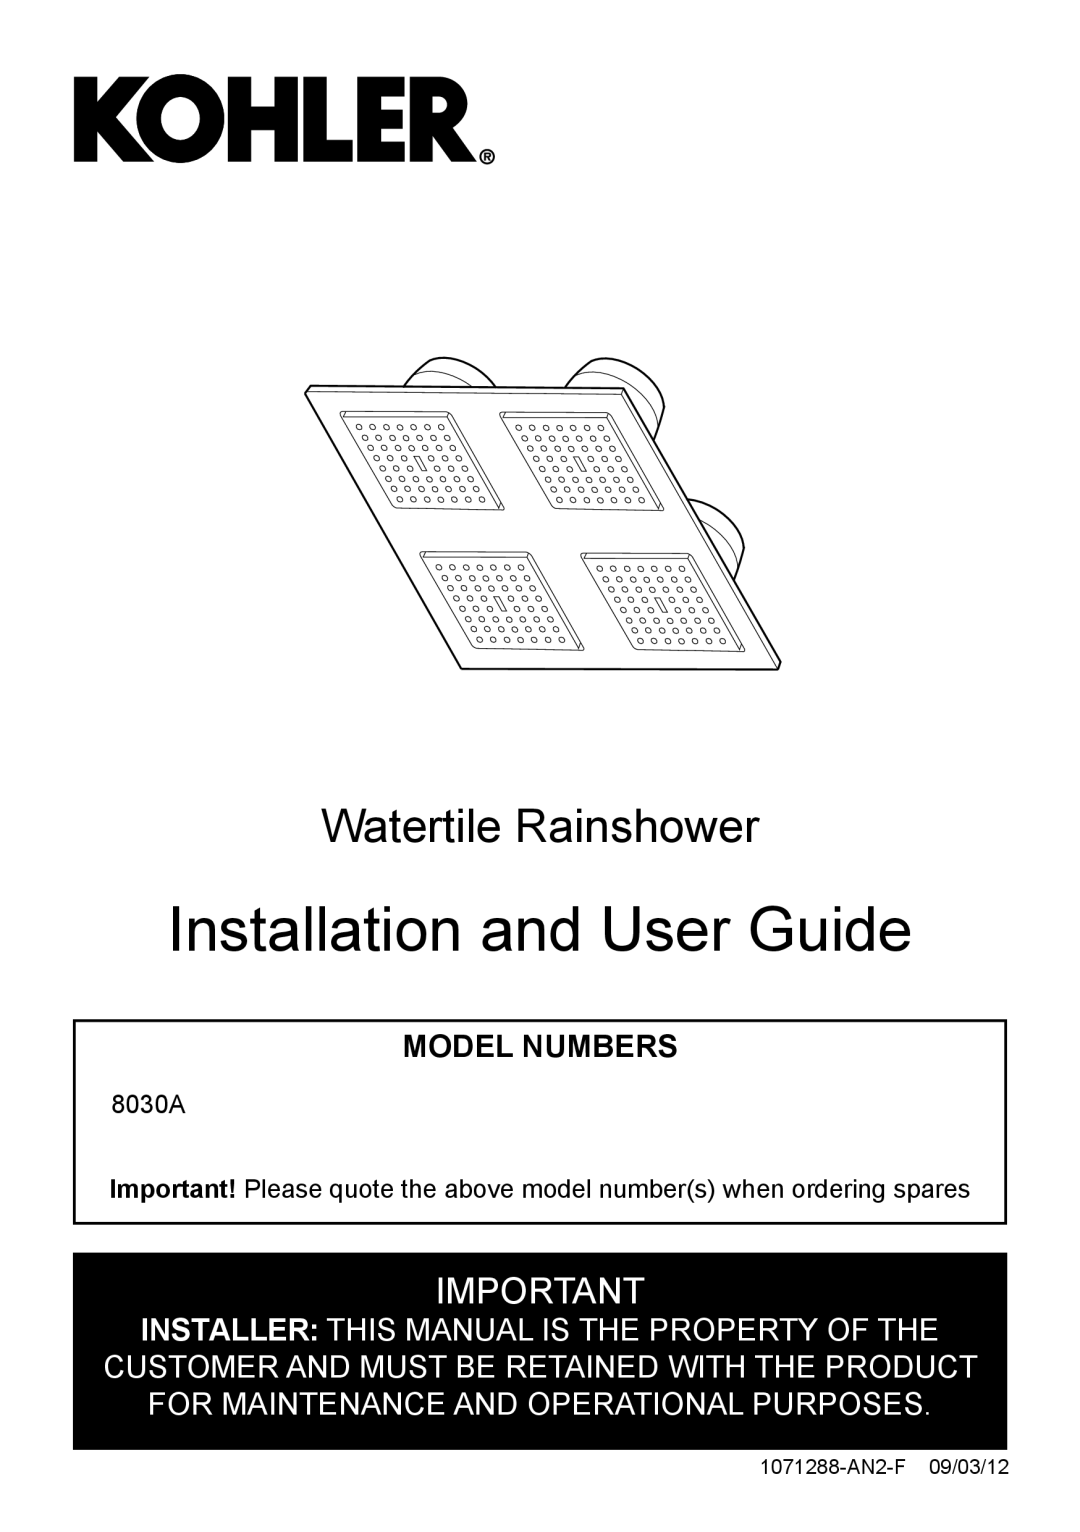 Kohler 8030A manual Installation and User Guide, Watertile Rainshower, Model Numbers 